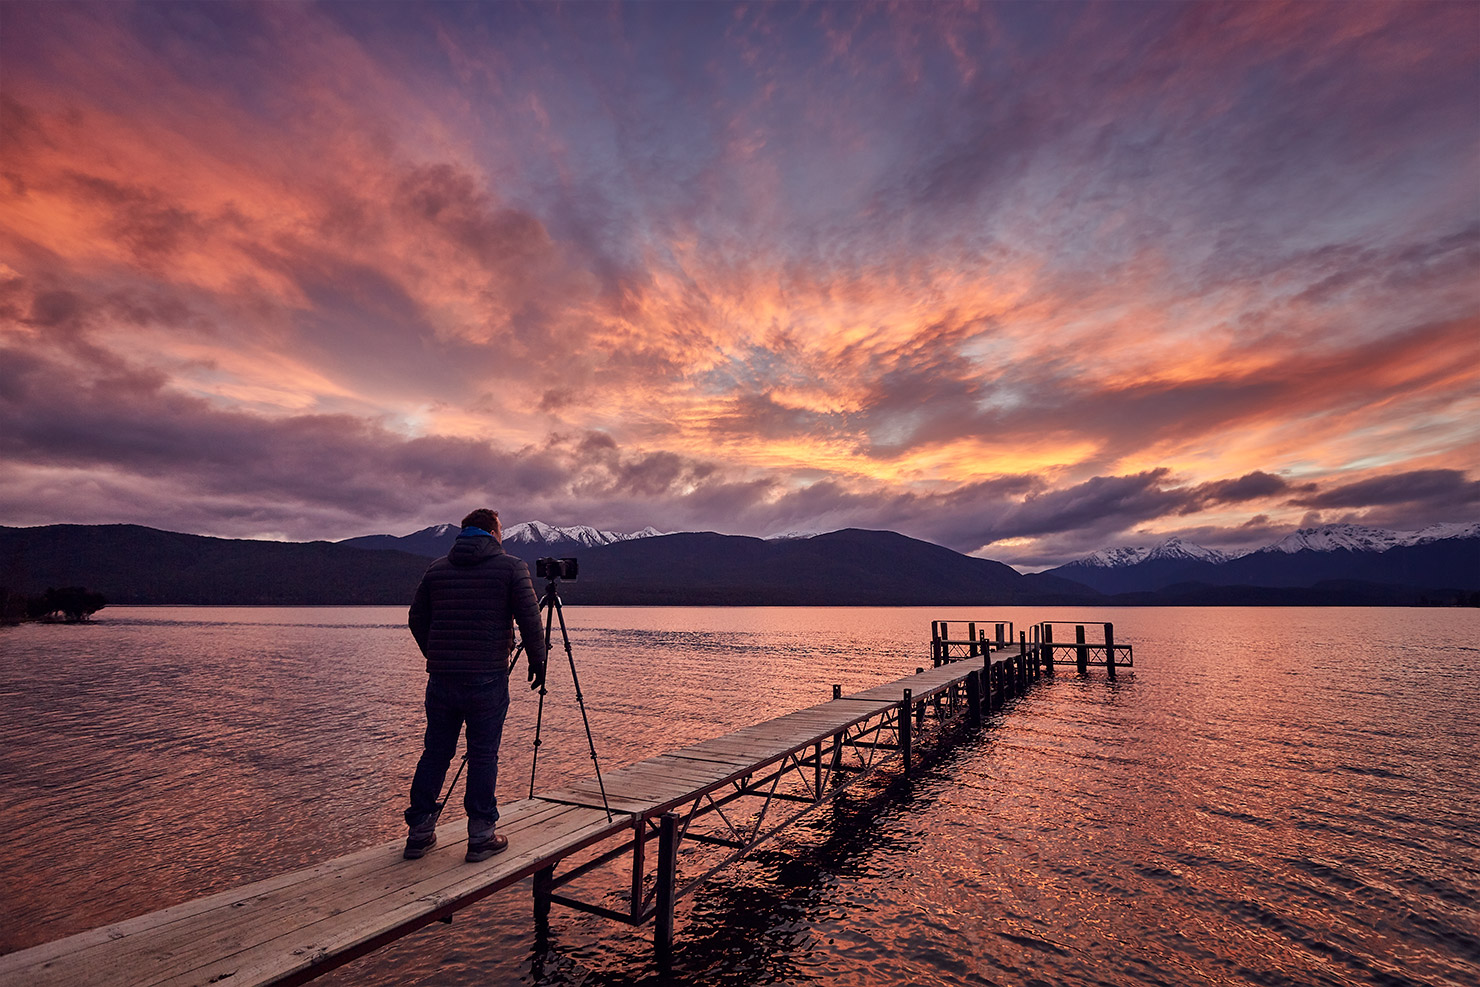 Lake Te Anau Sky Sunset Restless Paul Reiffer Jetty Phase One 100MP XF Rollei Filters New Zealand BTS Behind Scenes Colour Explosion